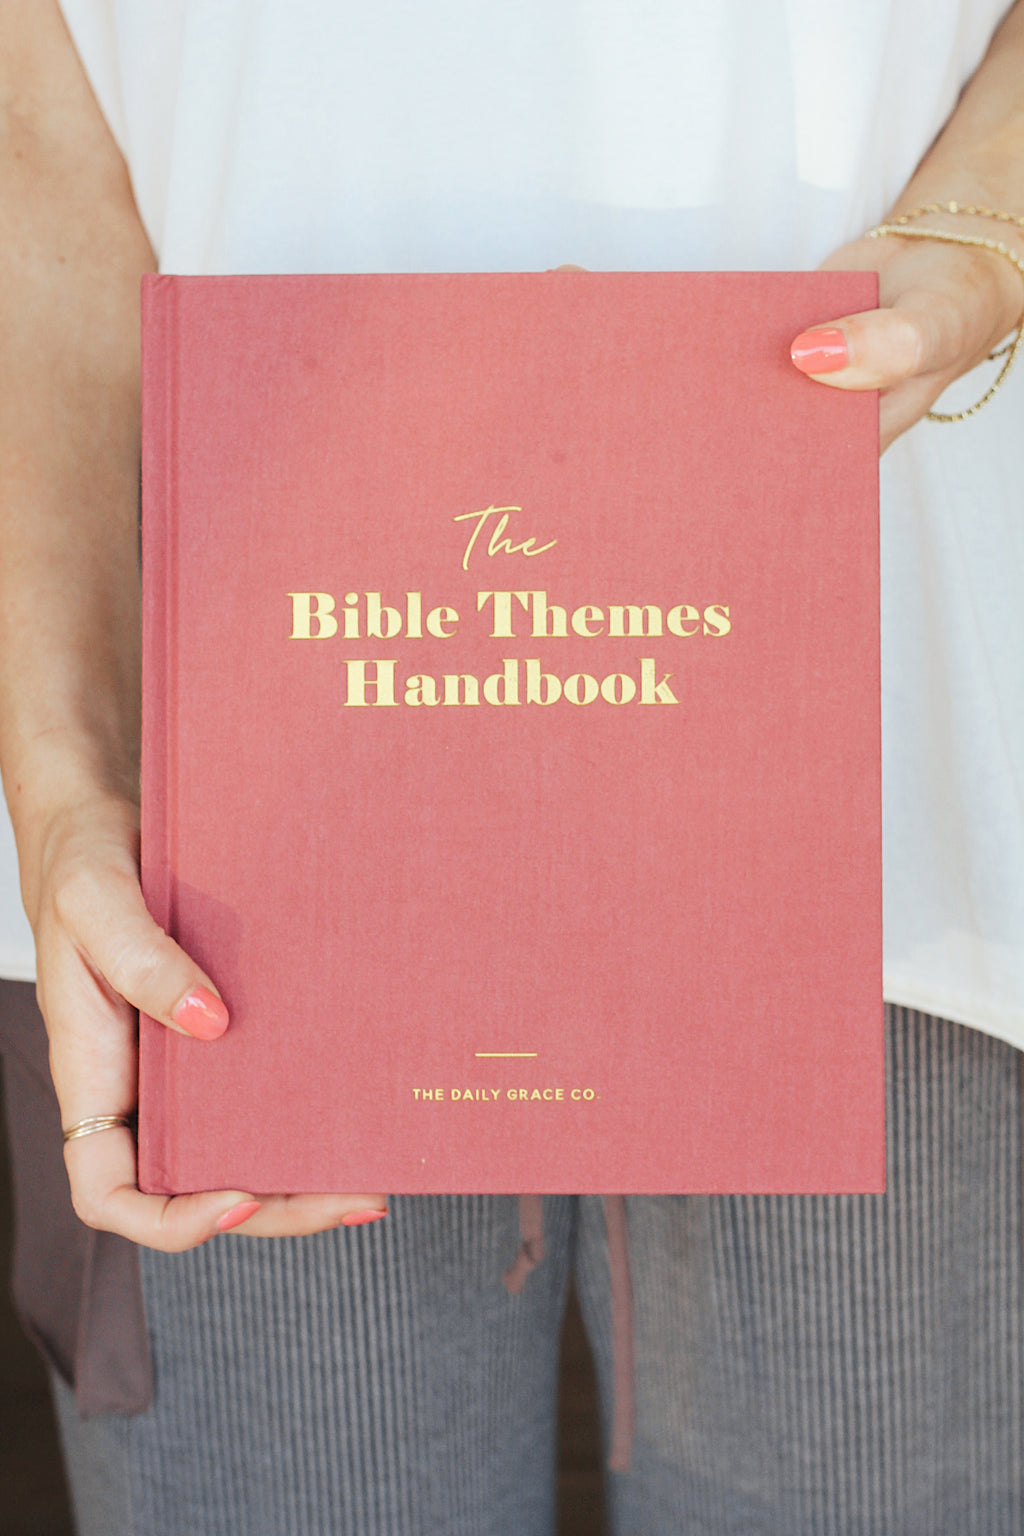 The Bible Themes Handbook - By Daily Grace co.